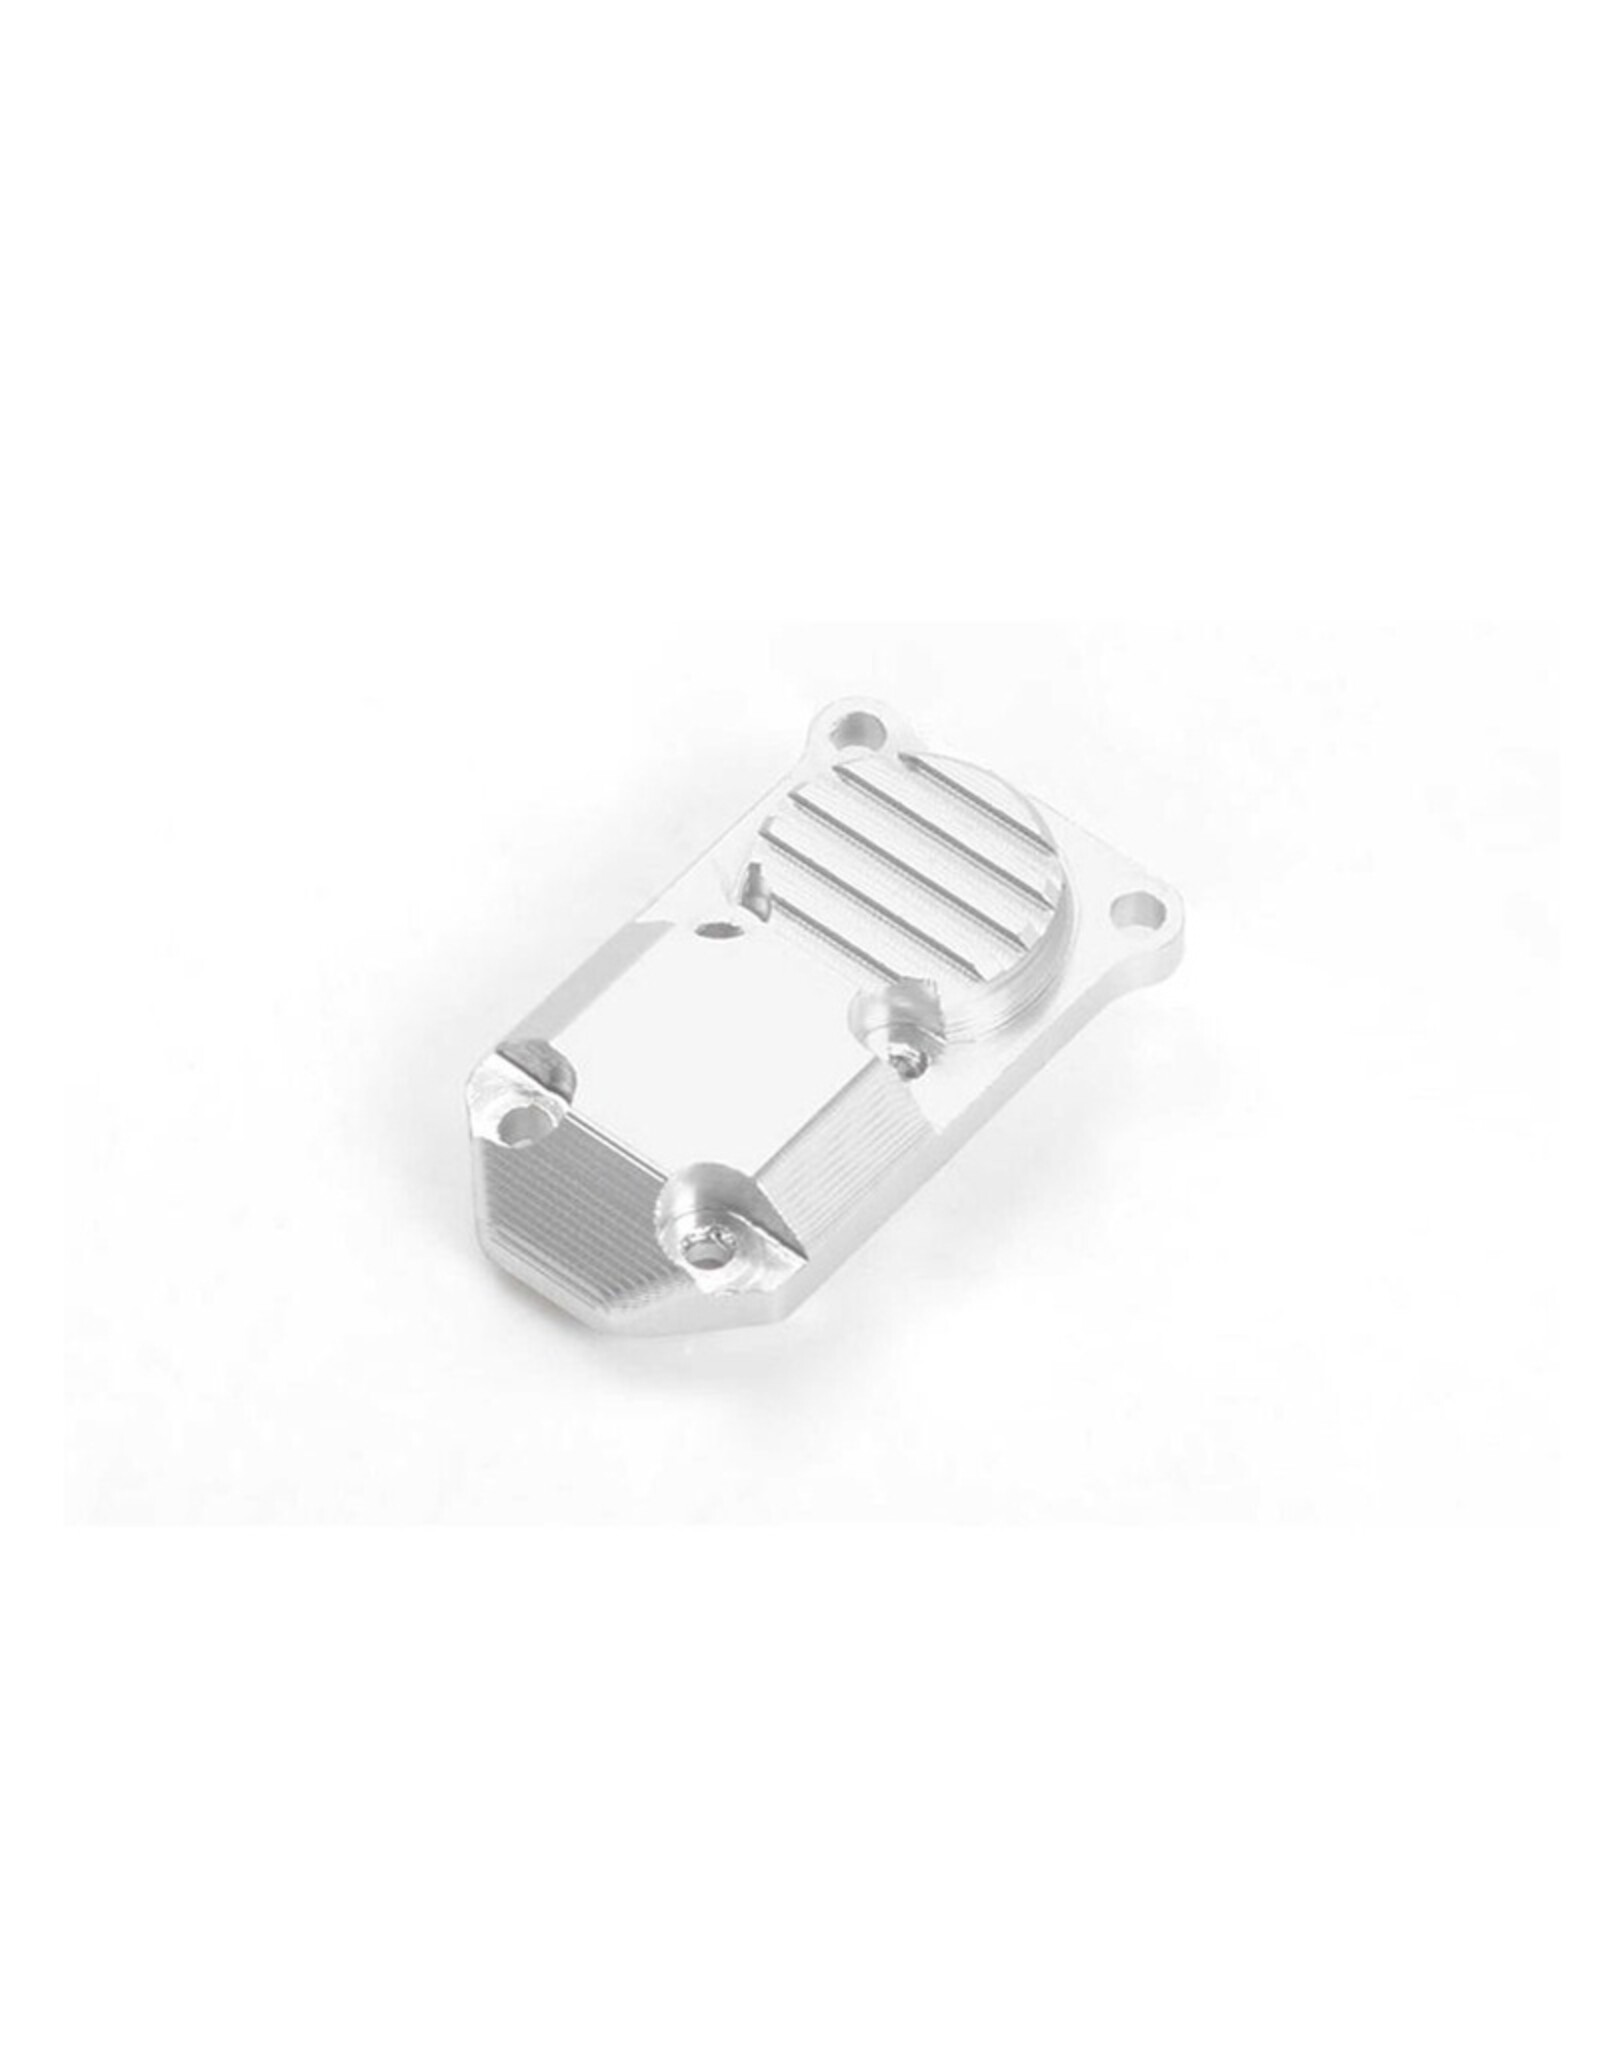 RC4WD RC4VVVC1037 Diff Cover for Axial SCX24 1/24 RTR Silver